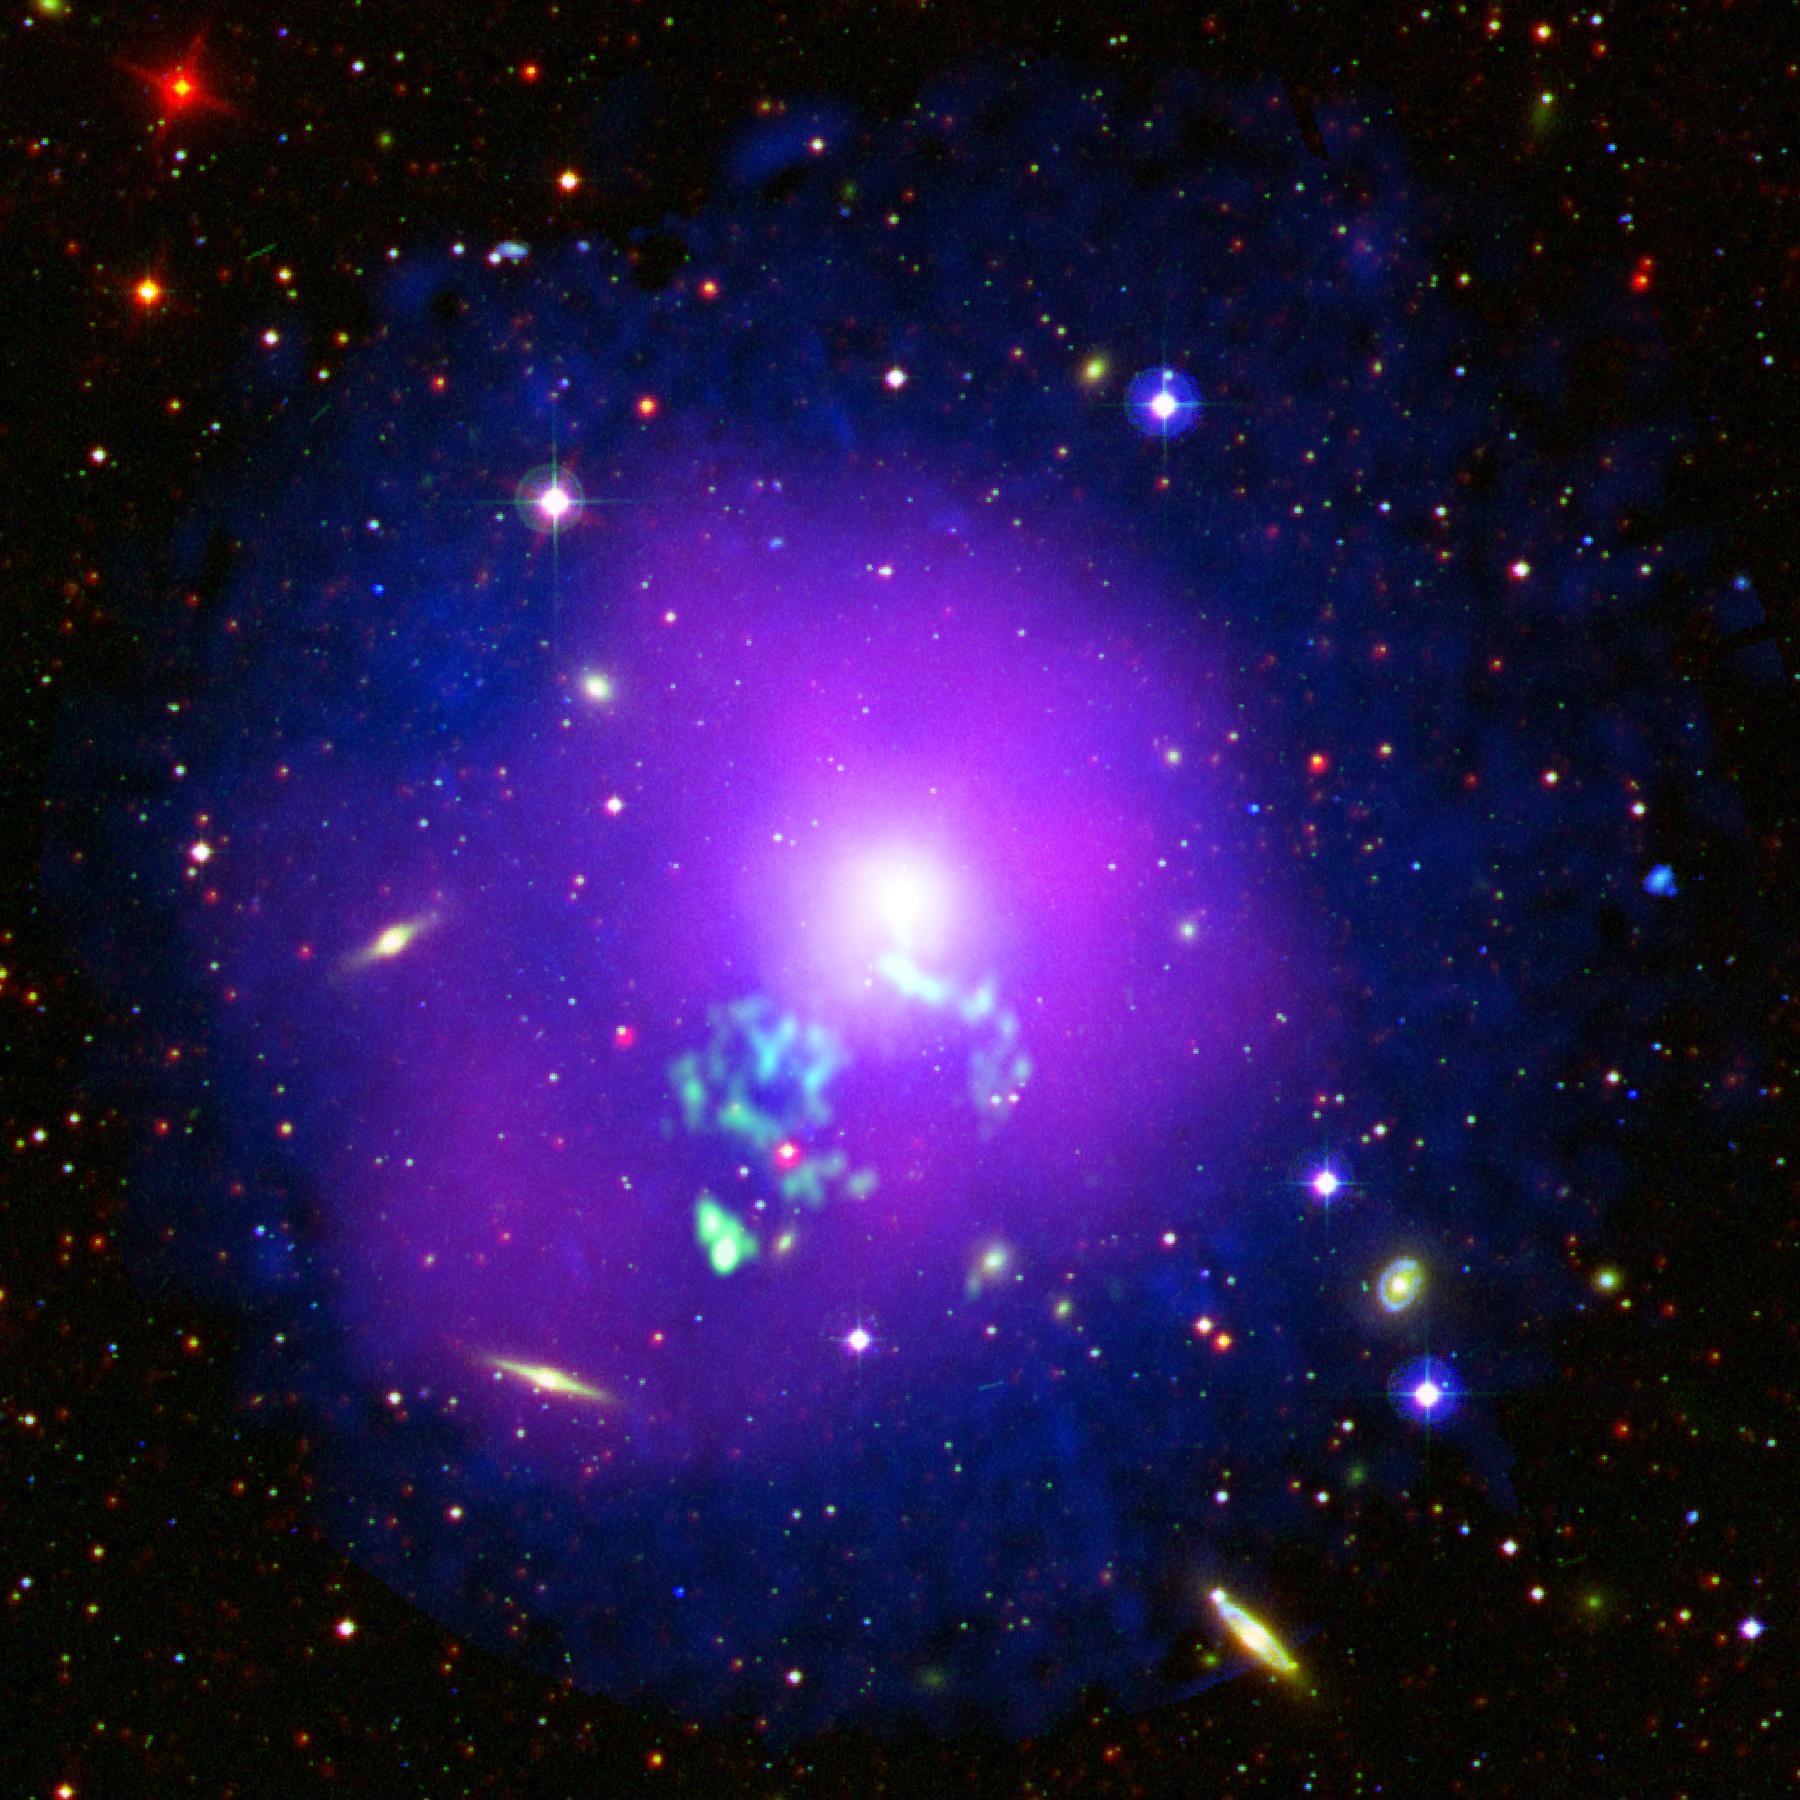 Multiwavelength view of NGC 5044 shown using a combination of WISE infrared, Digitized Sky Survey optical, Galex near-ultraviolet images.